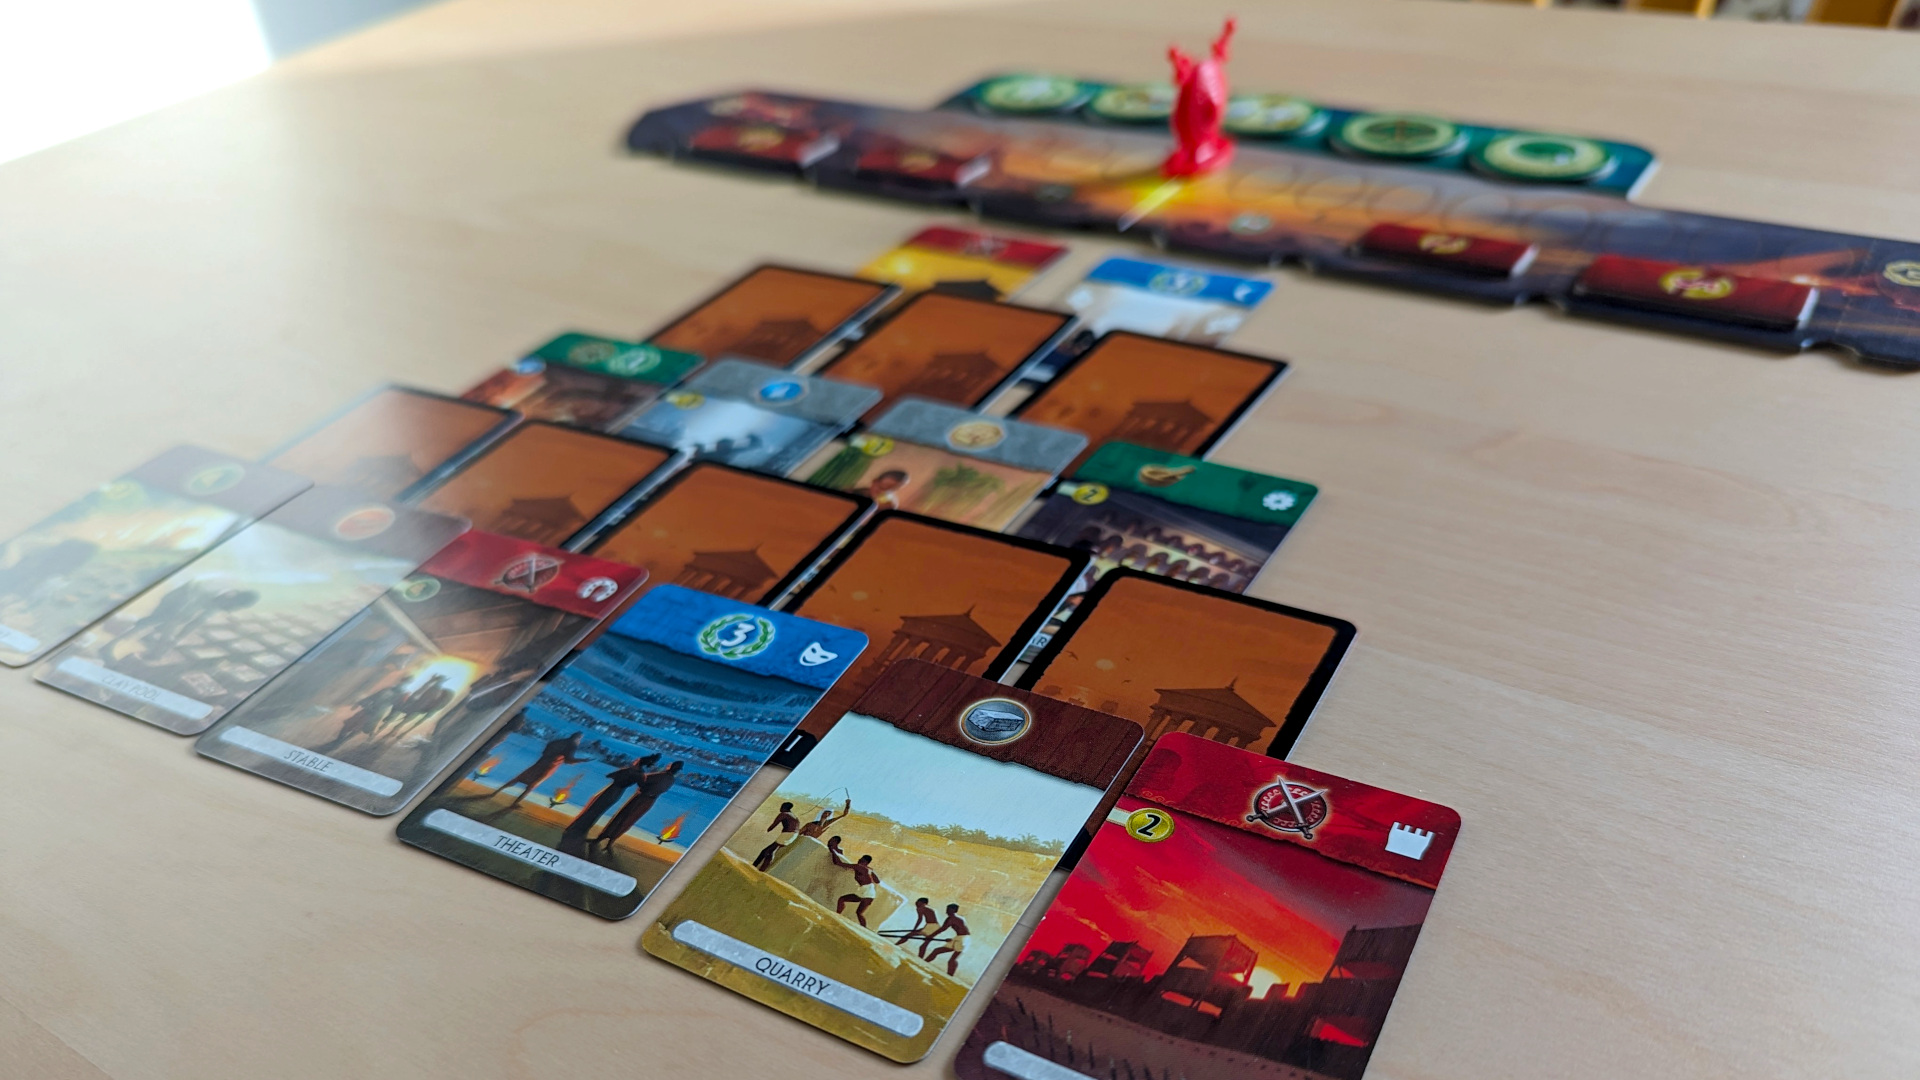 7 Wonders Duel review - author photo showing the game's cards and military victory track laid out on a table